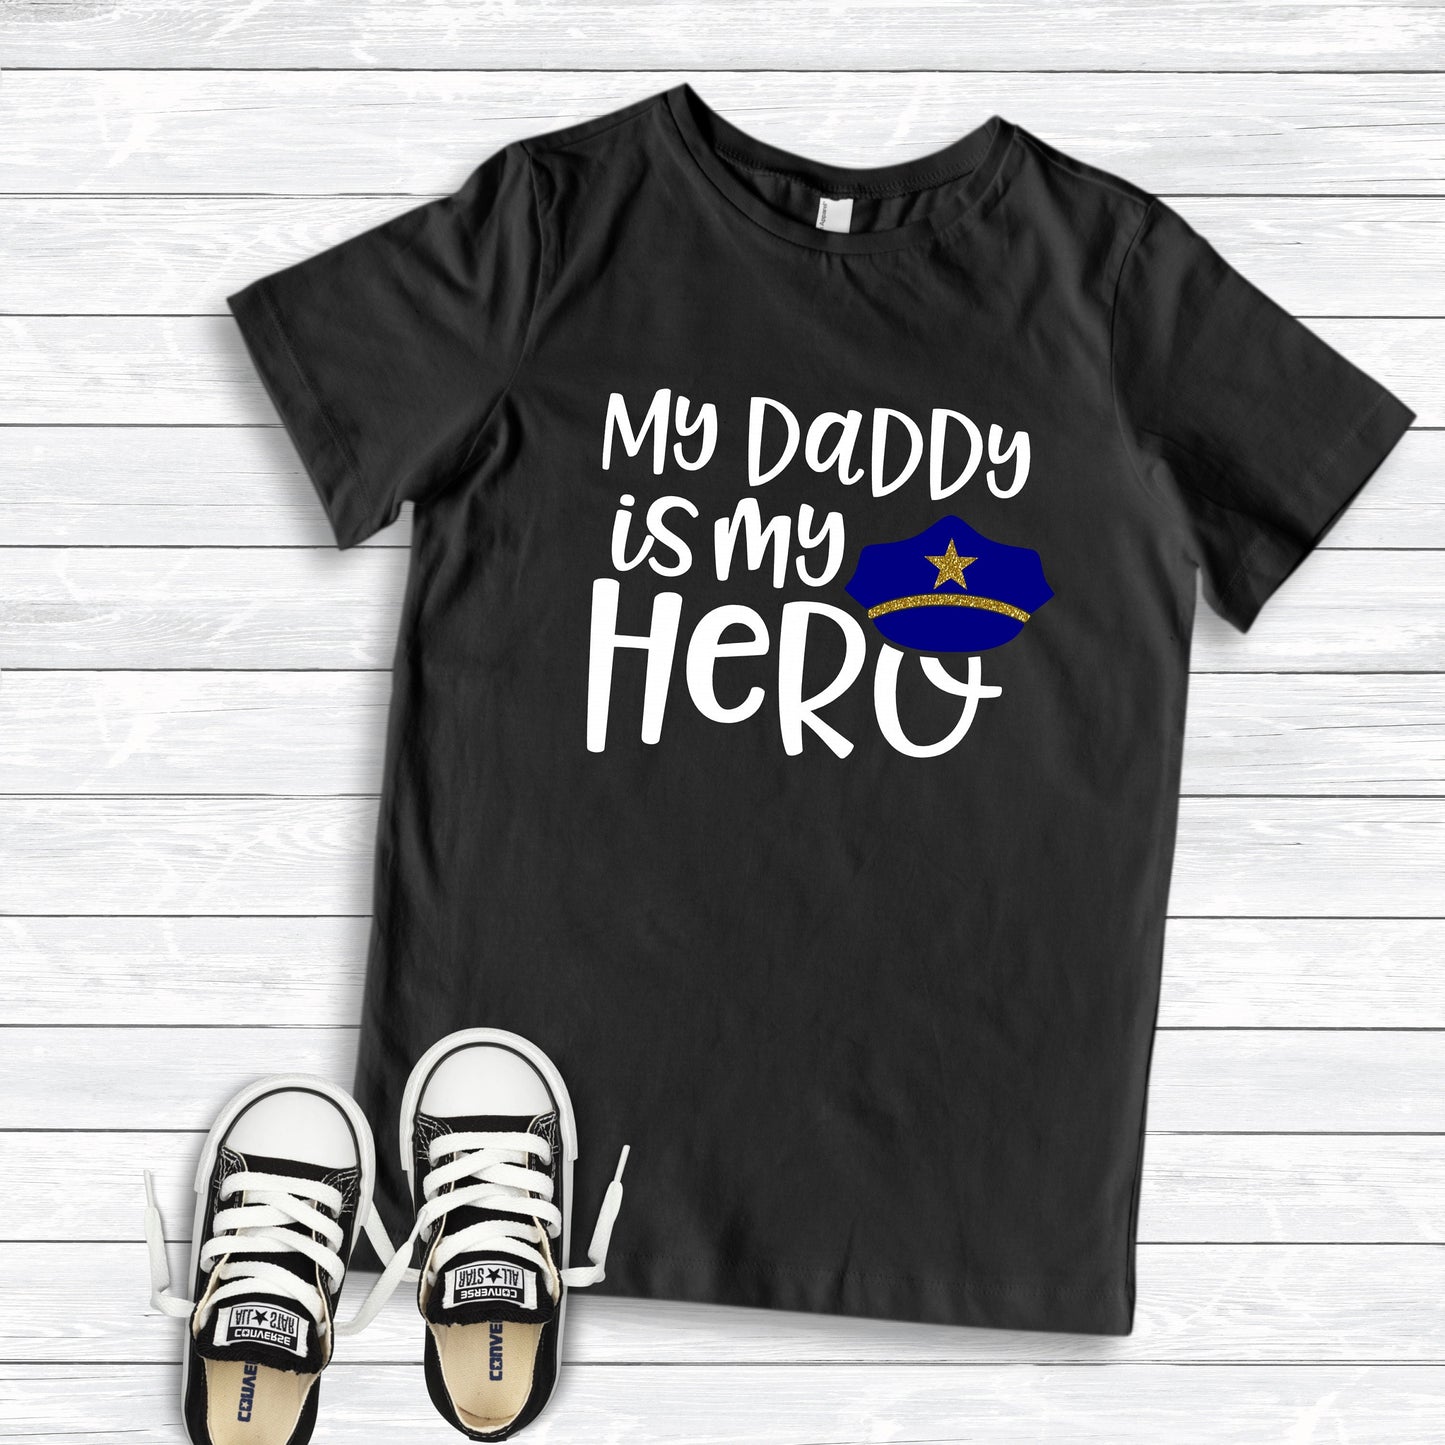 My Daddy is My Hero Infant, Toddler or Kids Shirt or Bodysuit - thin blue line shirt - fathers day shirt - police shirt - police officer